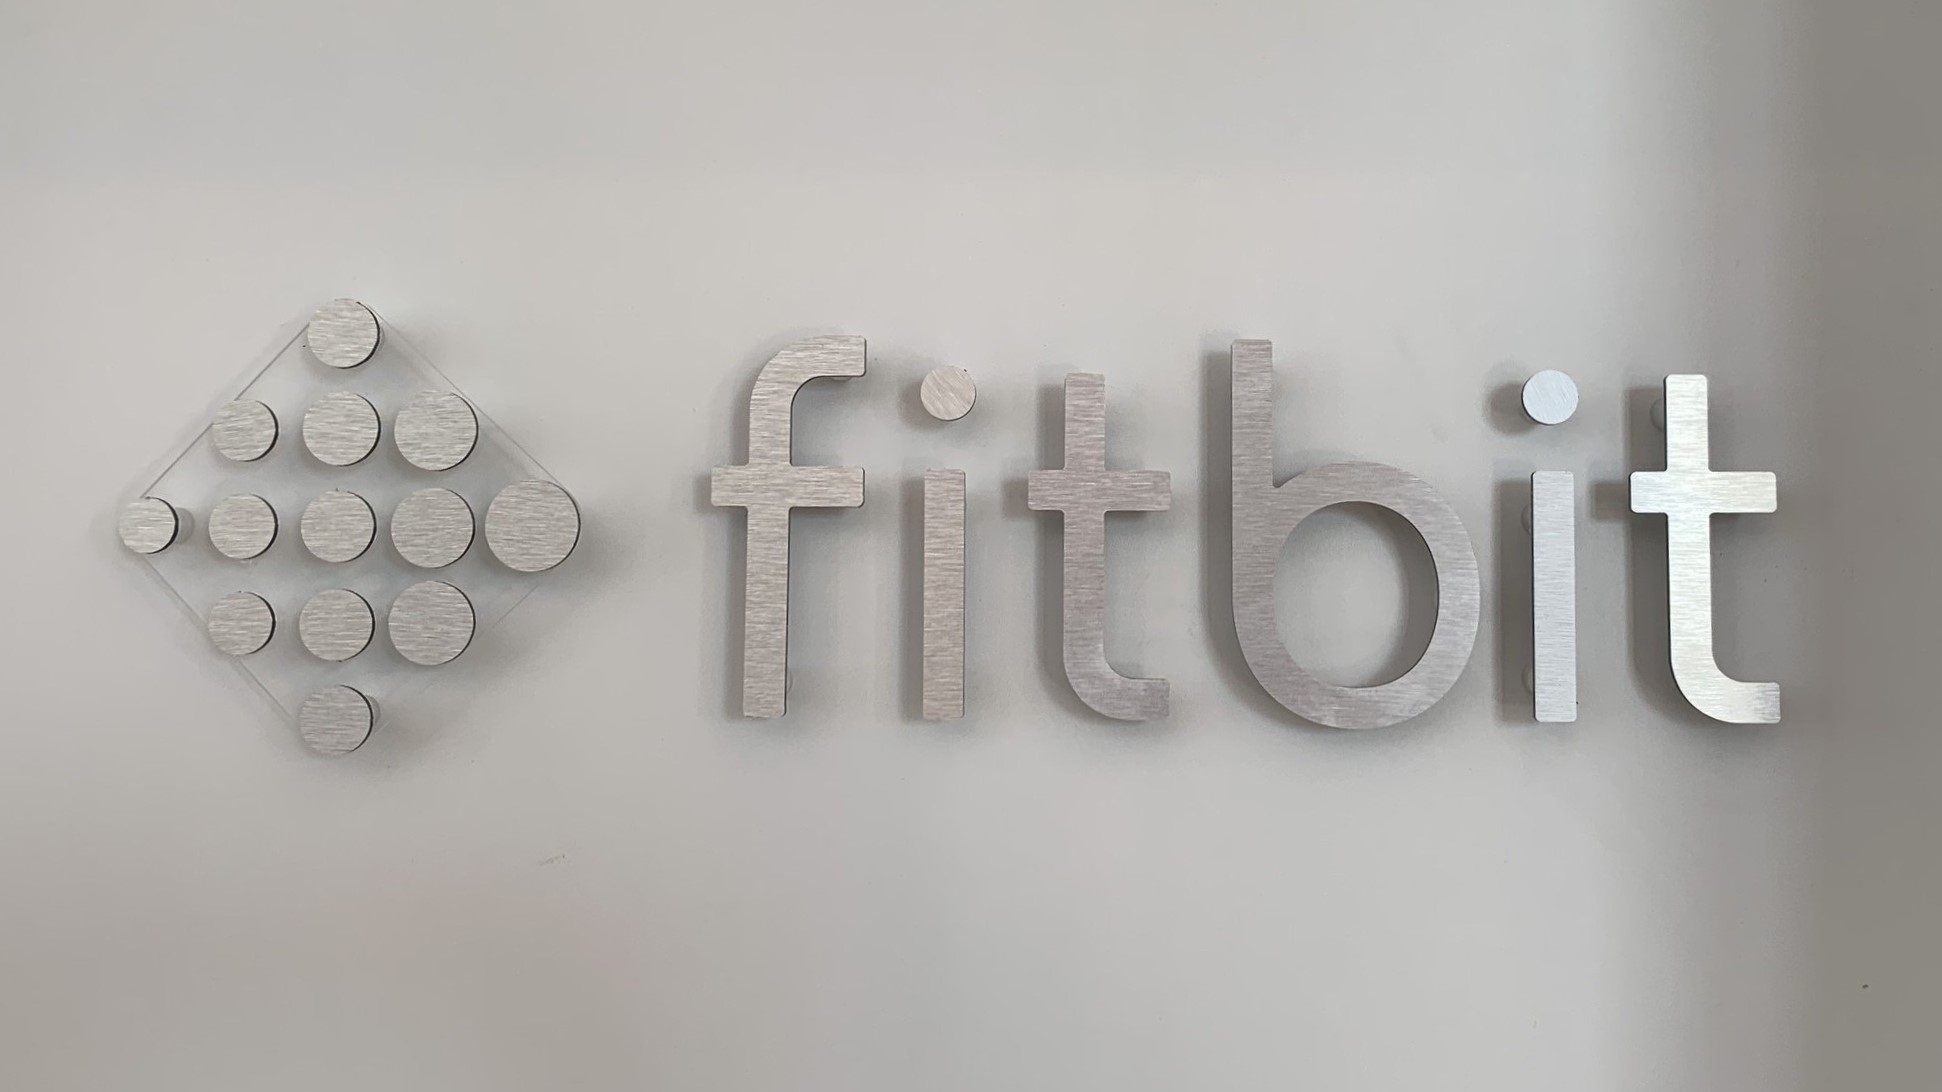 Google's begins to strip away Fitbit's online store as integration deepens